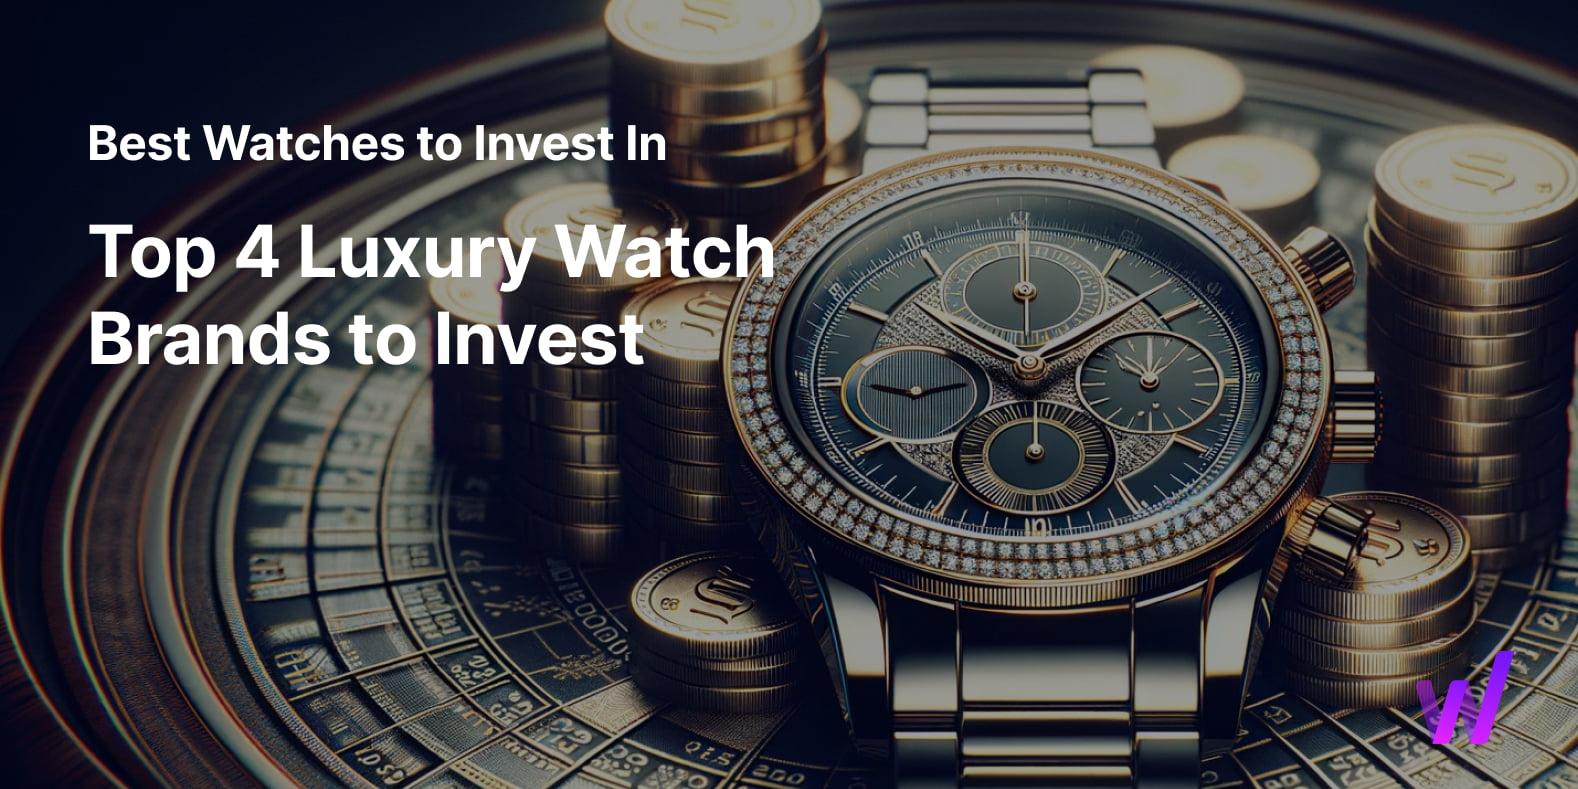 Best watches to invest in with top 4 luxury watch brands writing and city landscape picture under that with a yellow color 